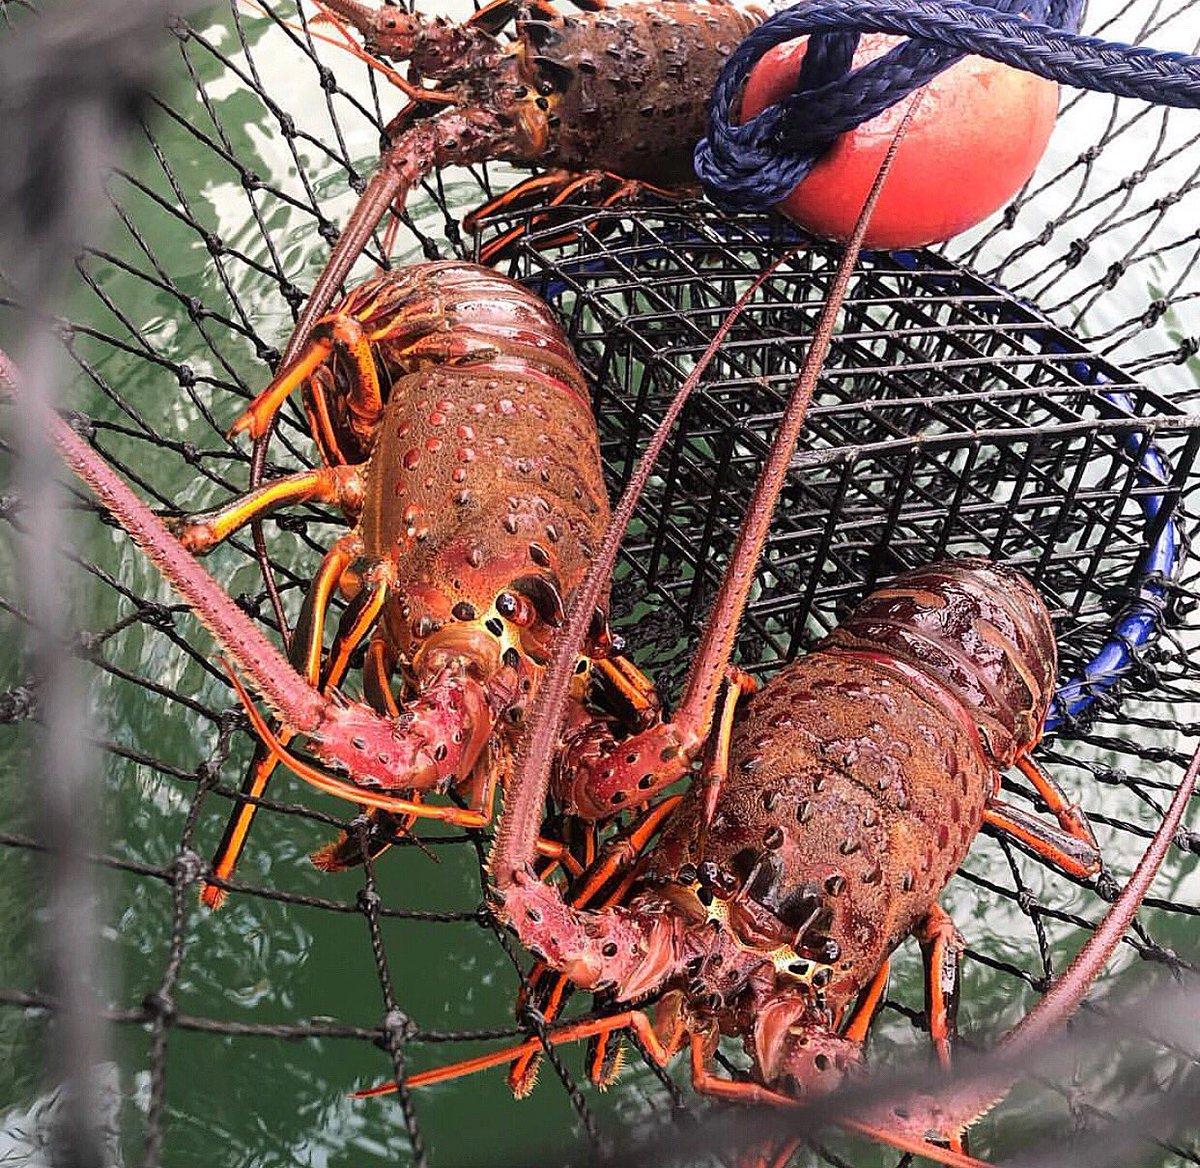 Get ready for our next tournament Labsta-palooza November 9th & 10th. Visit our website for more information. 🦐 #TheMarlinClub #LobsterFishing #SportFishing #SanDiegoFishing #ShelterIsland #OceanBeachSanDiego #OceanBeach #SanDiego_Ca #SunnySanDiego #VisitSanDiego #Lobsters